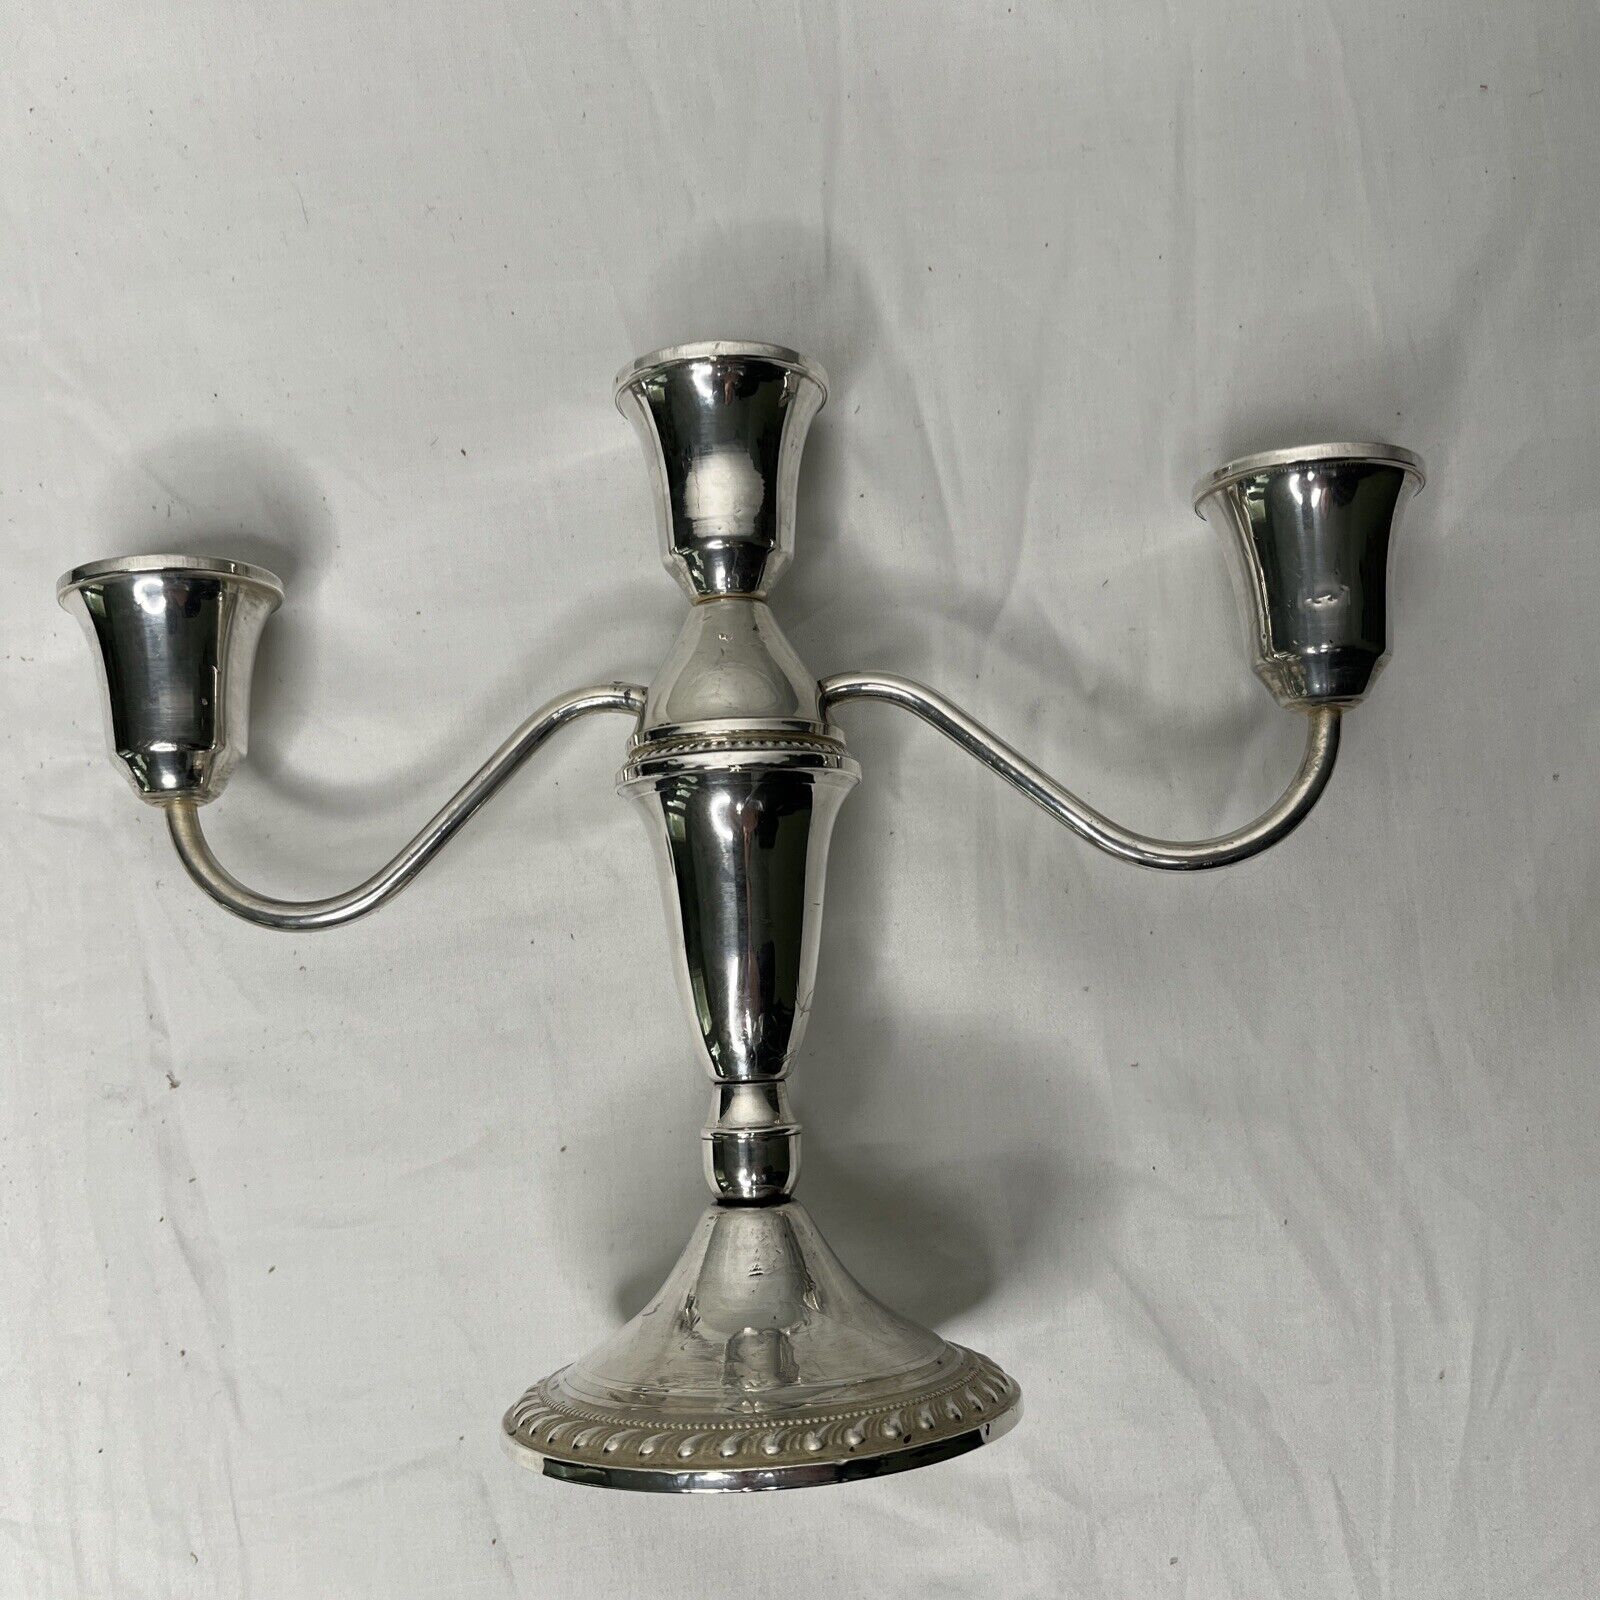 Antique Valuations: Duchin Creation 3 Arm Candelabra Sterling weighed